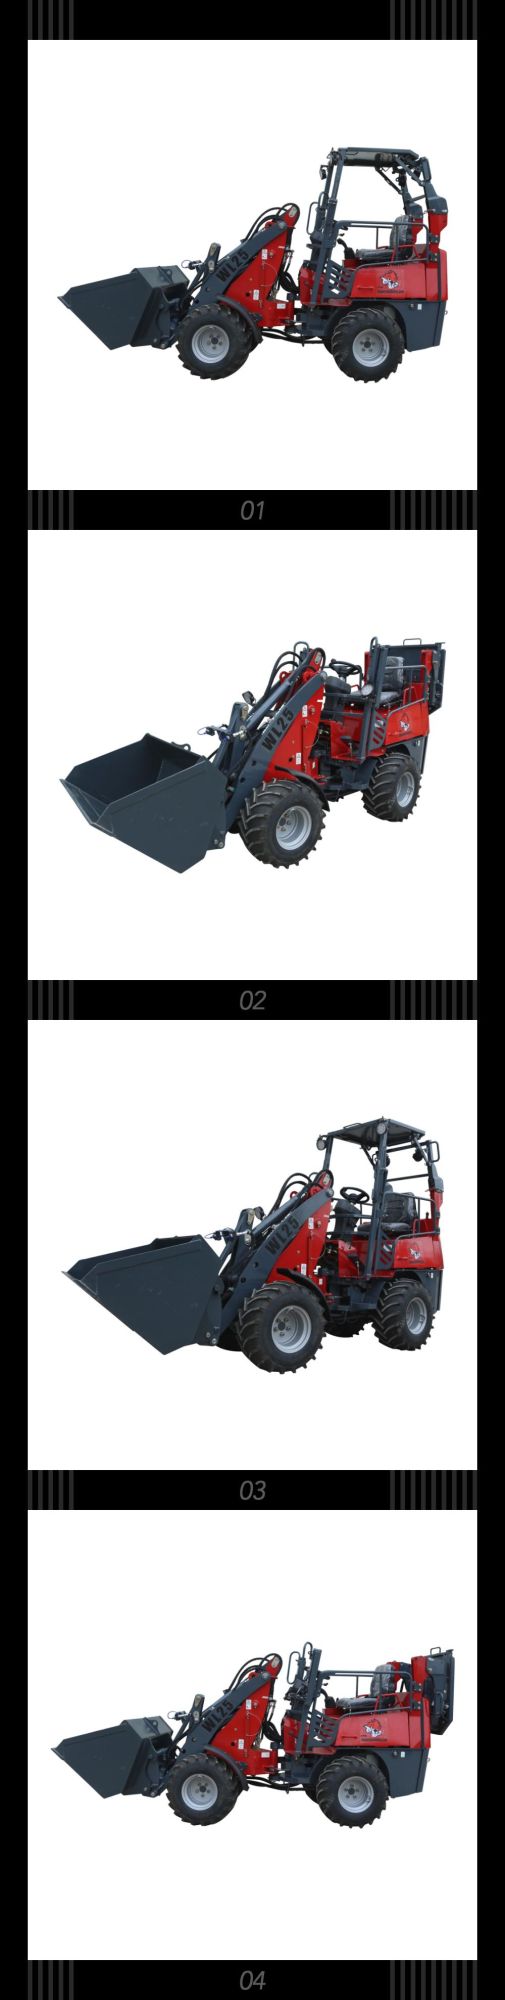 Small Wheel Hydraulic Loaders with Buckets Are on Sale